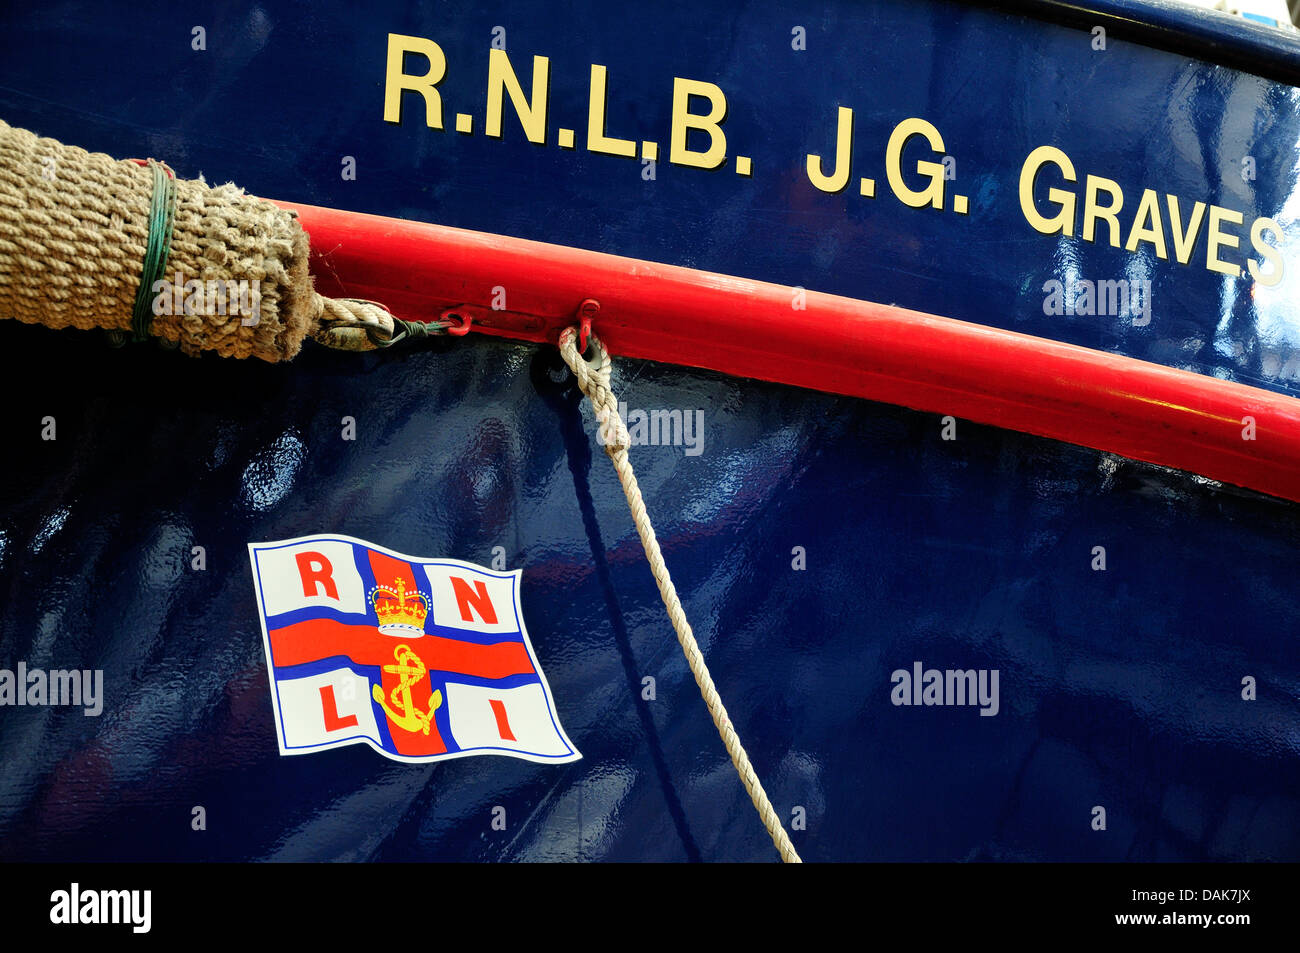 Chatham, Kent, England. Chatham Historic Dockyard. RNLI Historic Lifeboat Collection. Detail of hull, with flag insignia. Stock Photo